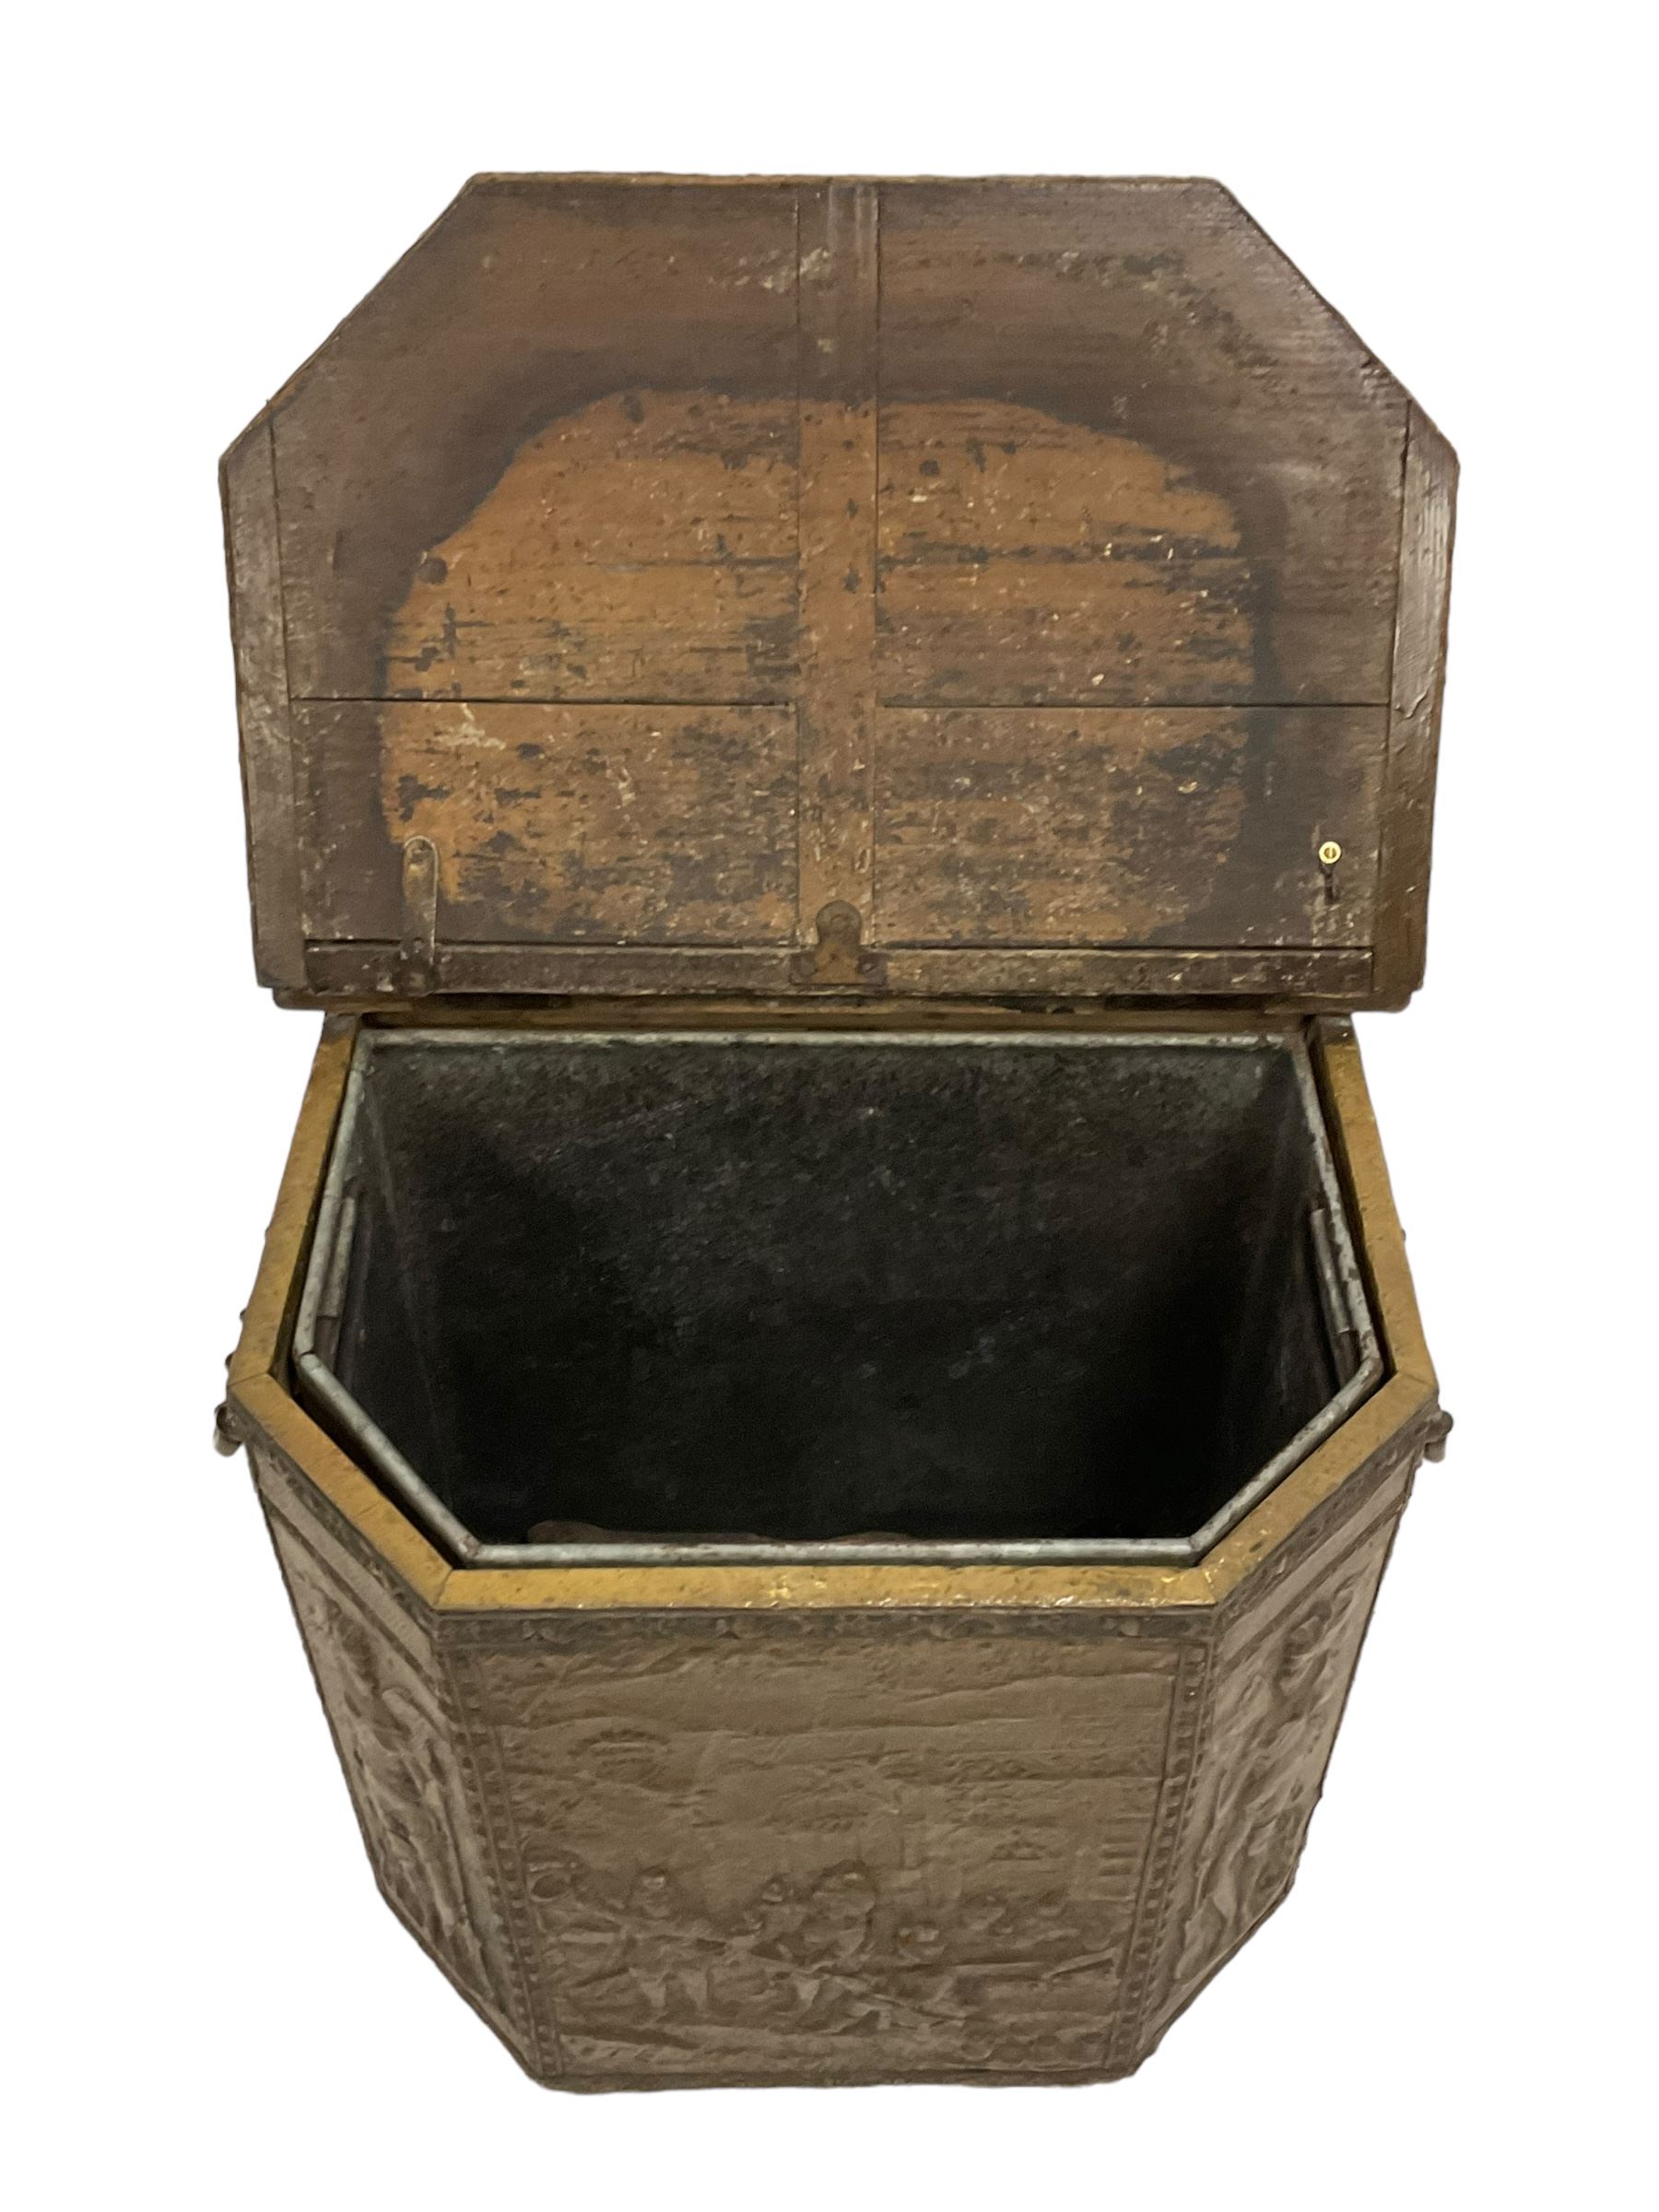 Large 19th century wooden and brass repousse coal box - Image 7 of 7